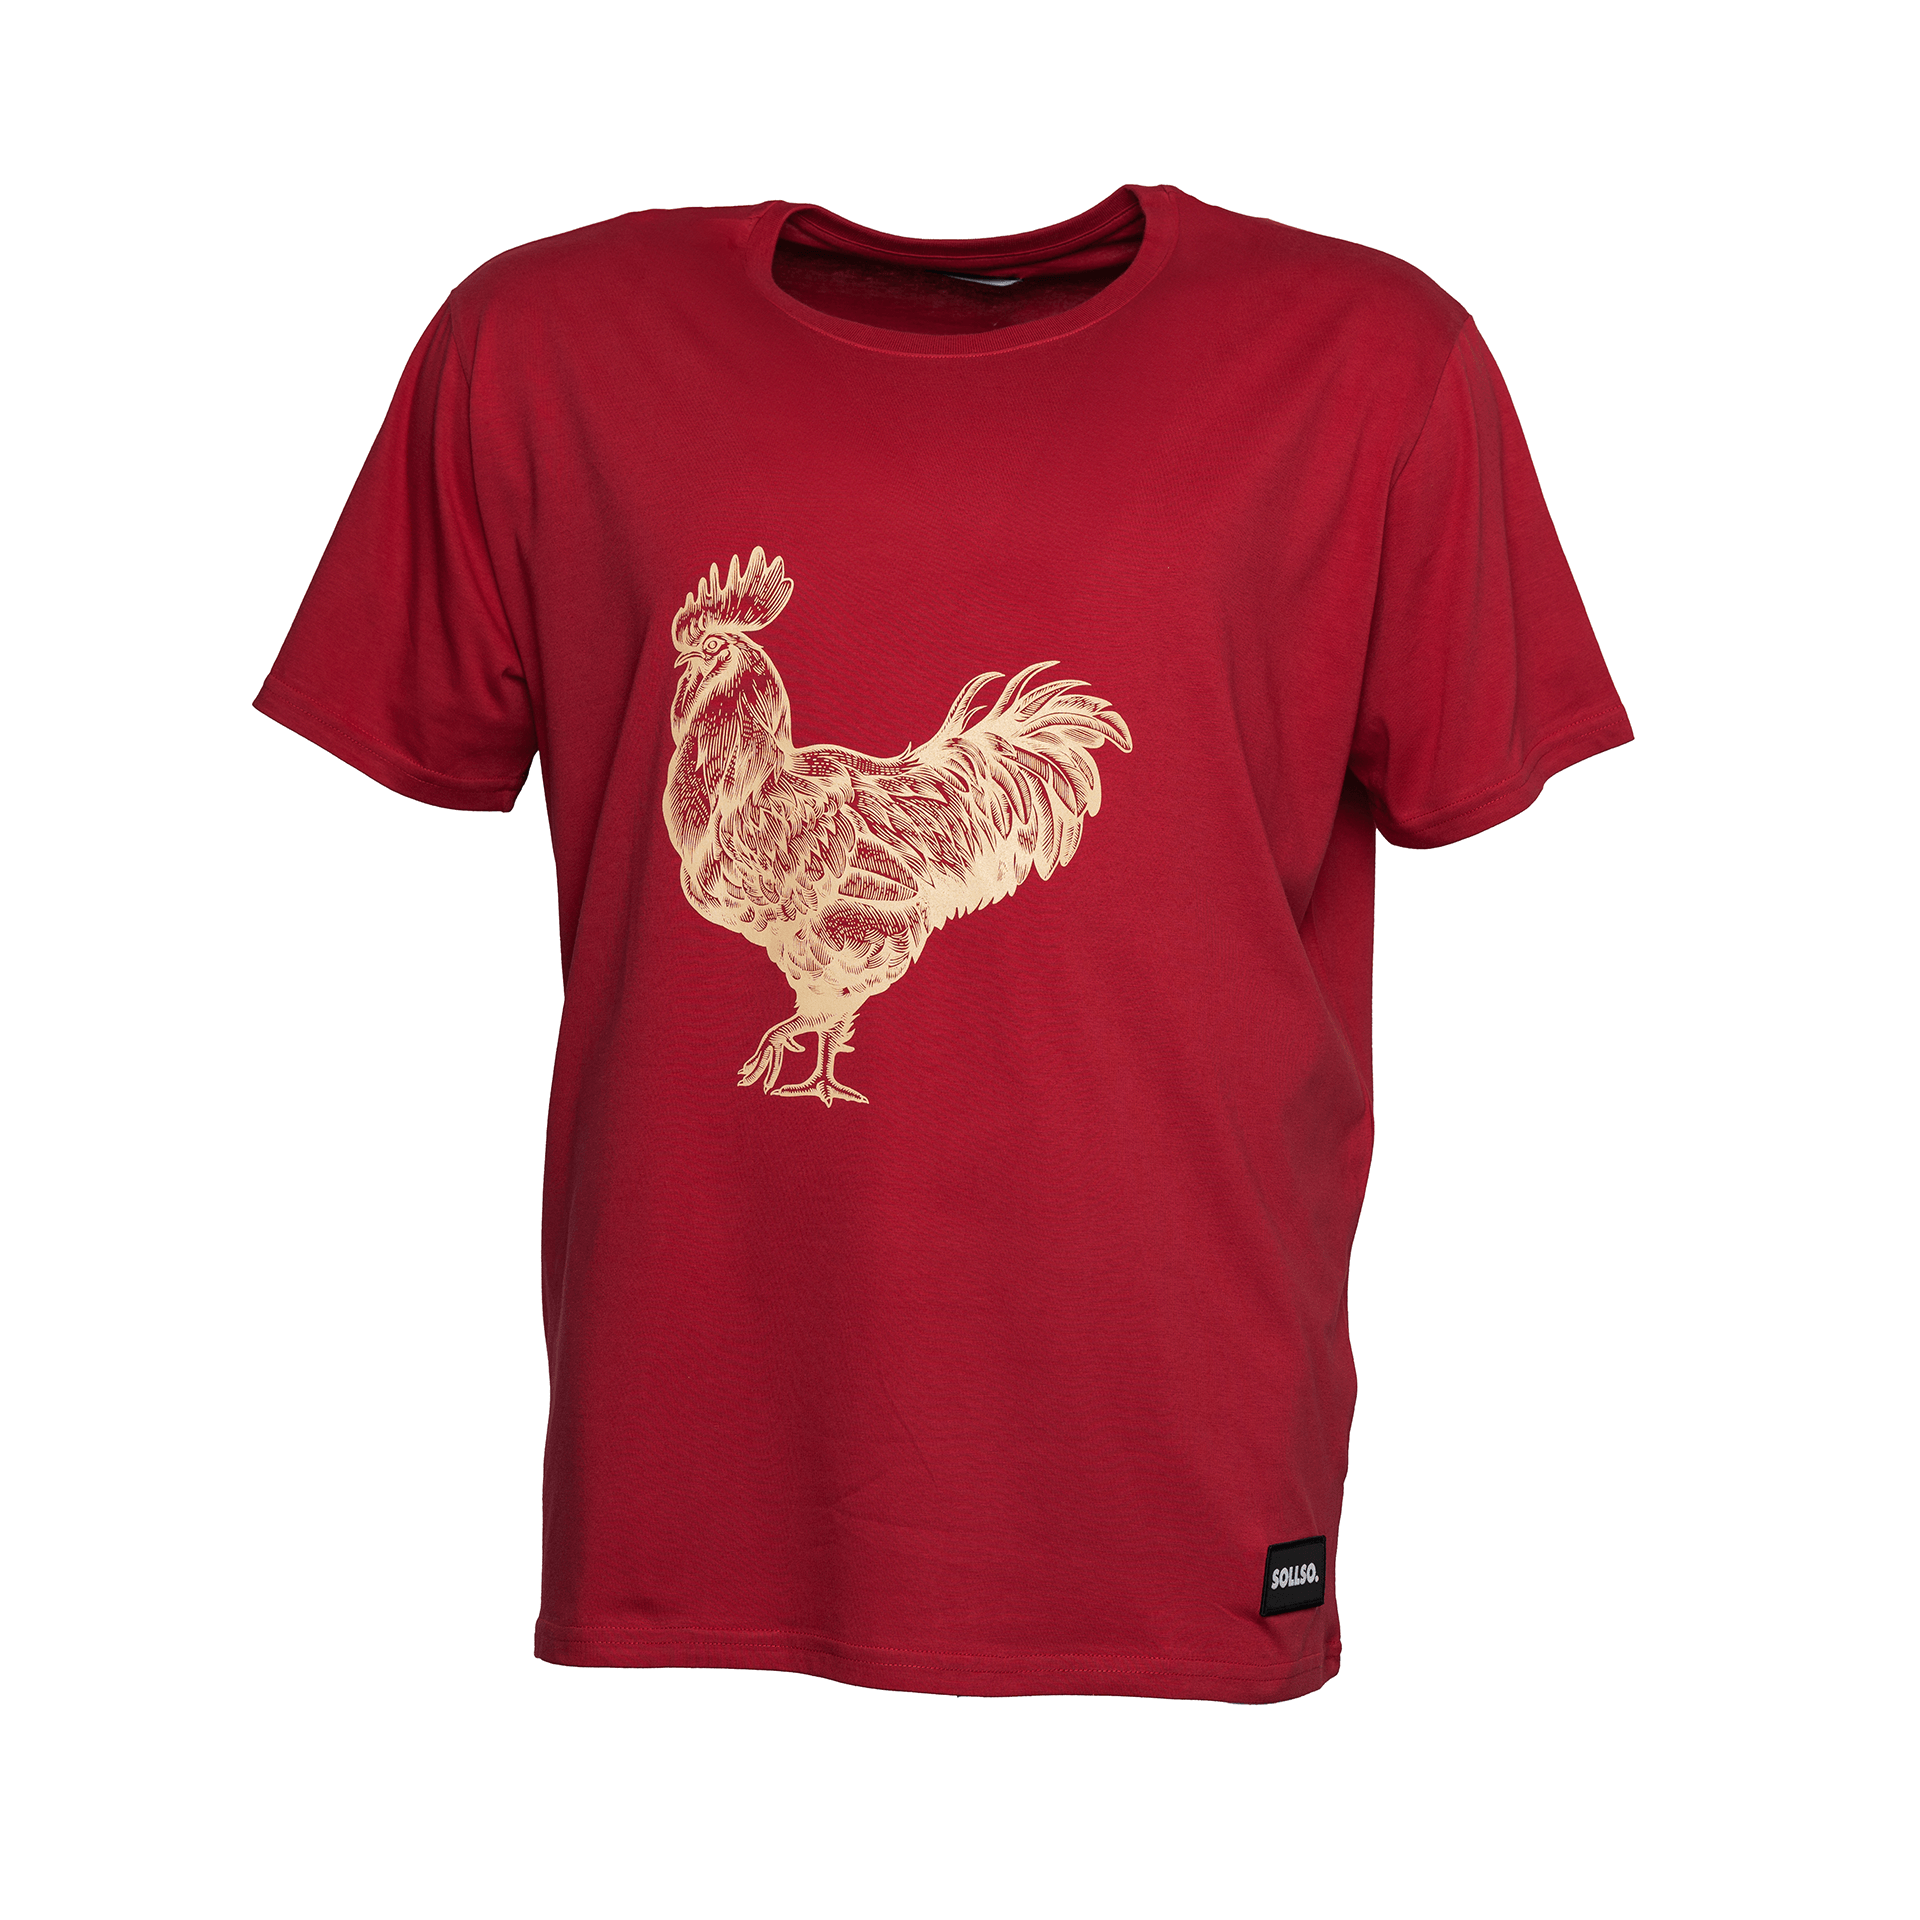 SOLLSO. T-Shirt "Rooster", Farbe Ginger Red, Größe 10XL